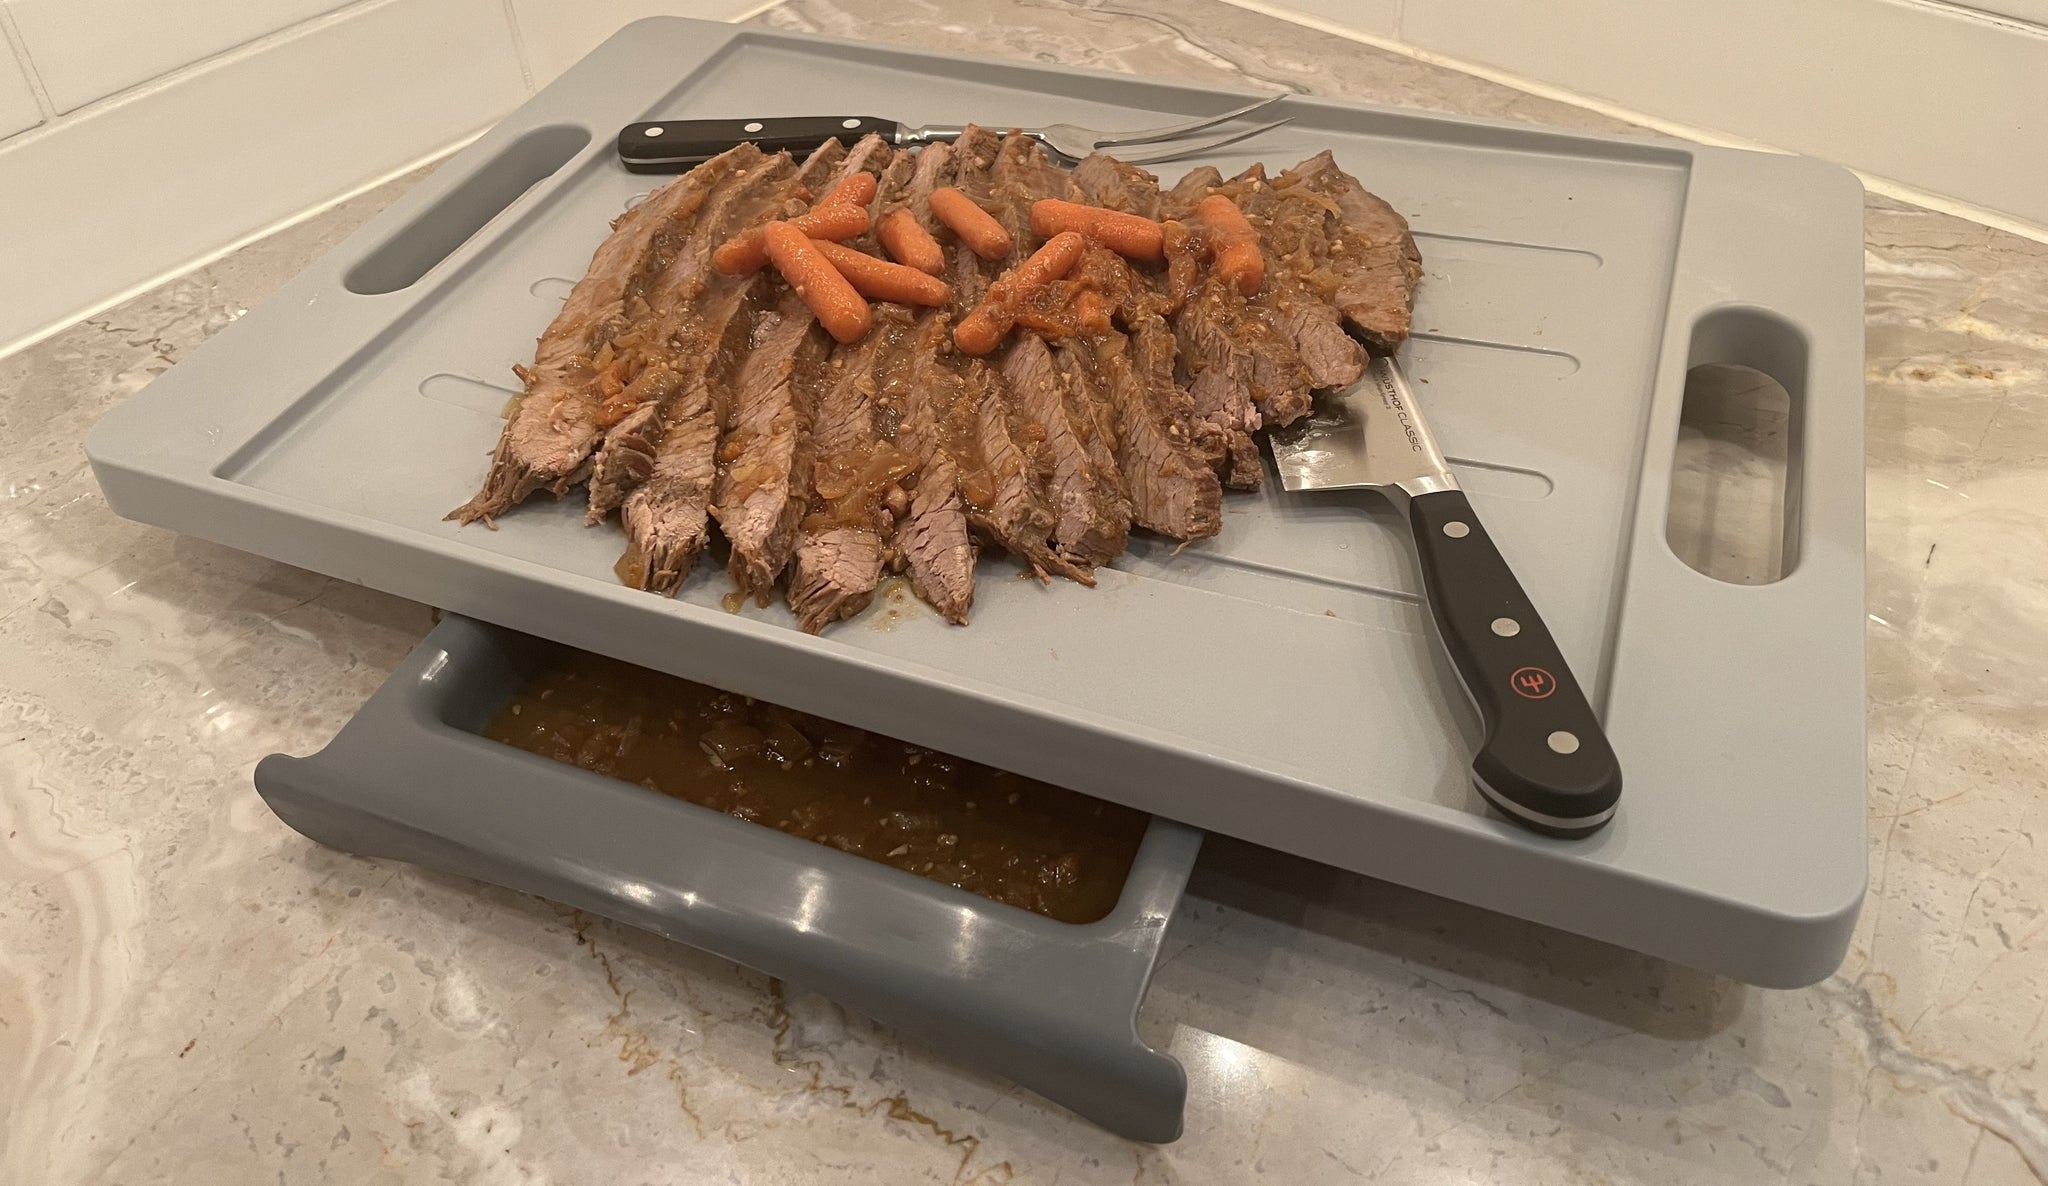 HDPE Cutting Board with Dripwell and Handle (1/2 Thick)